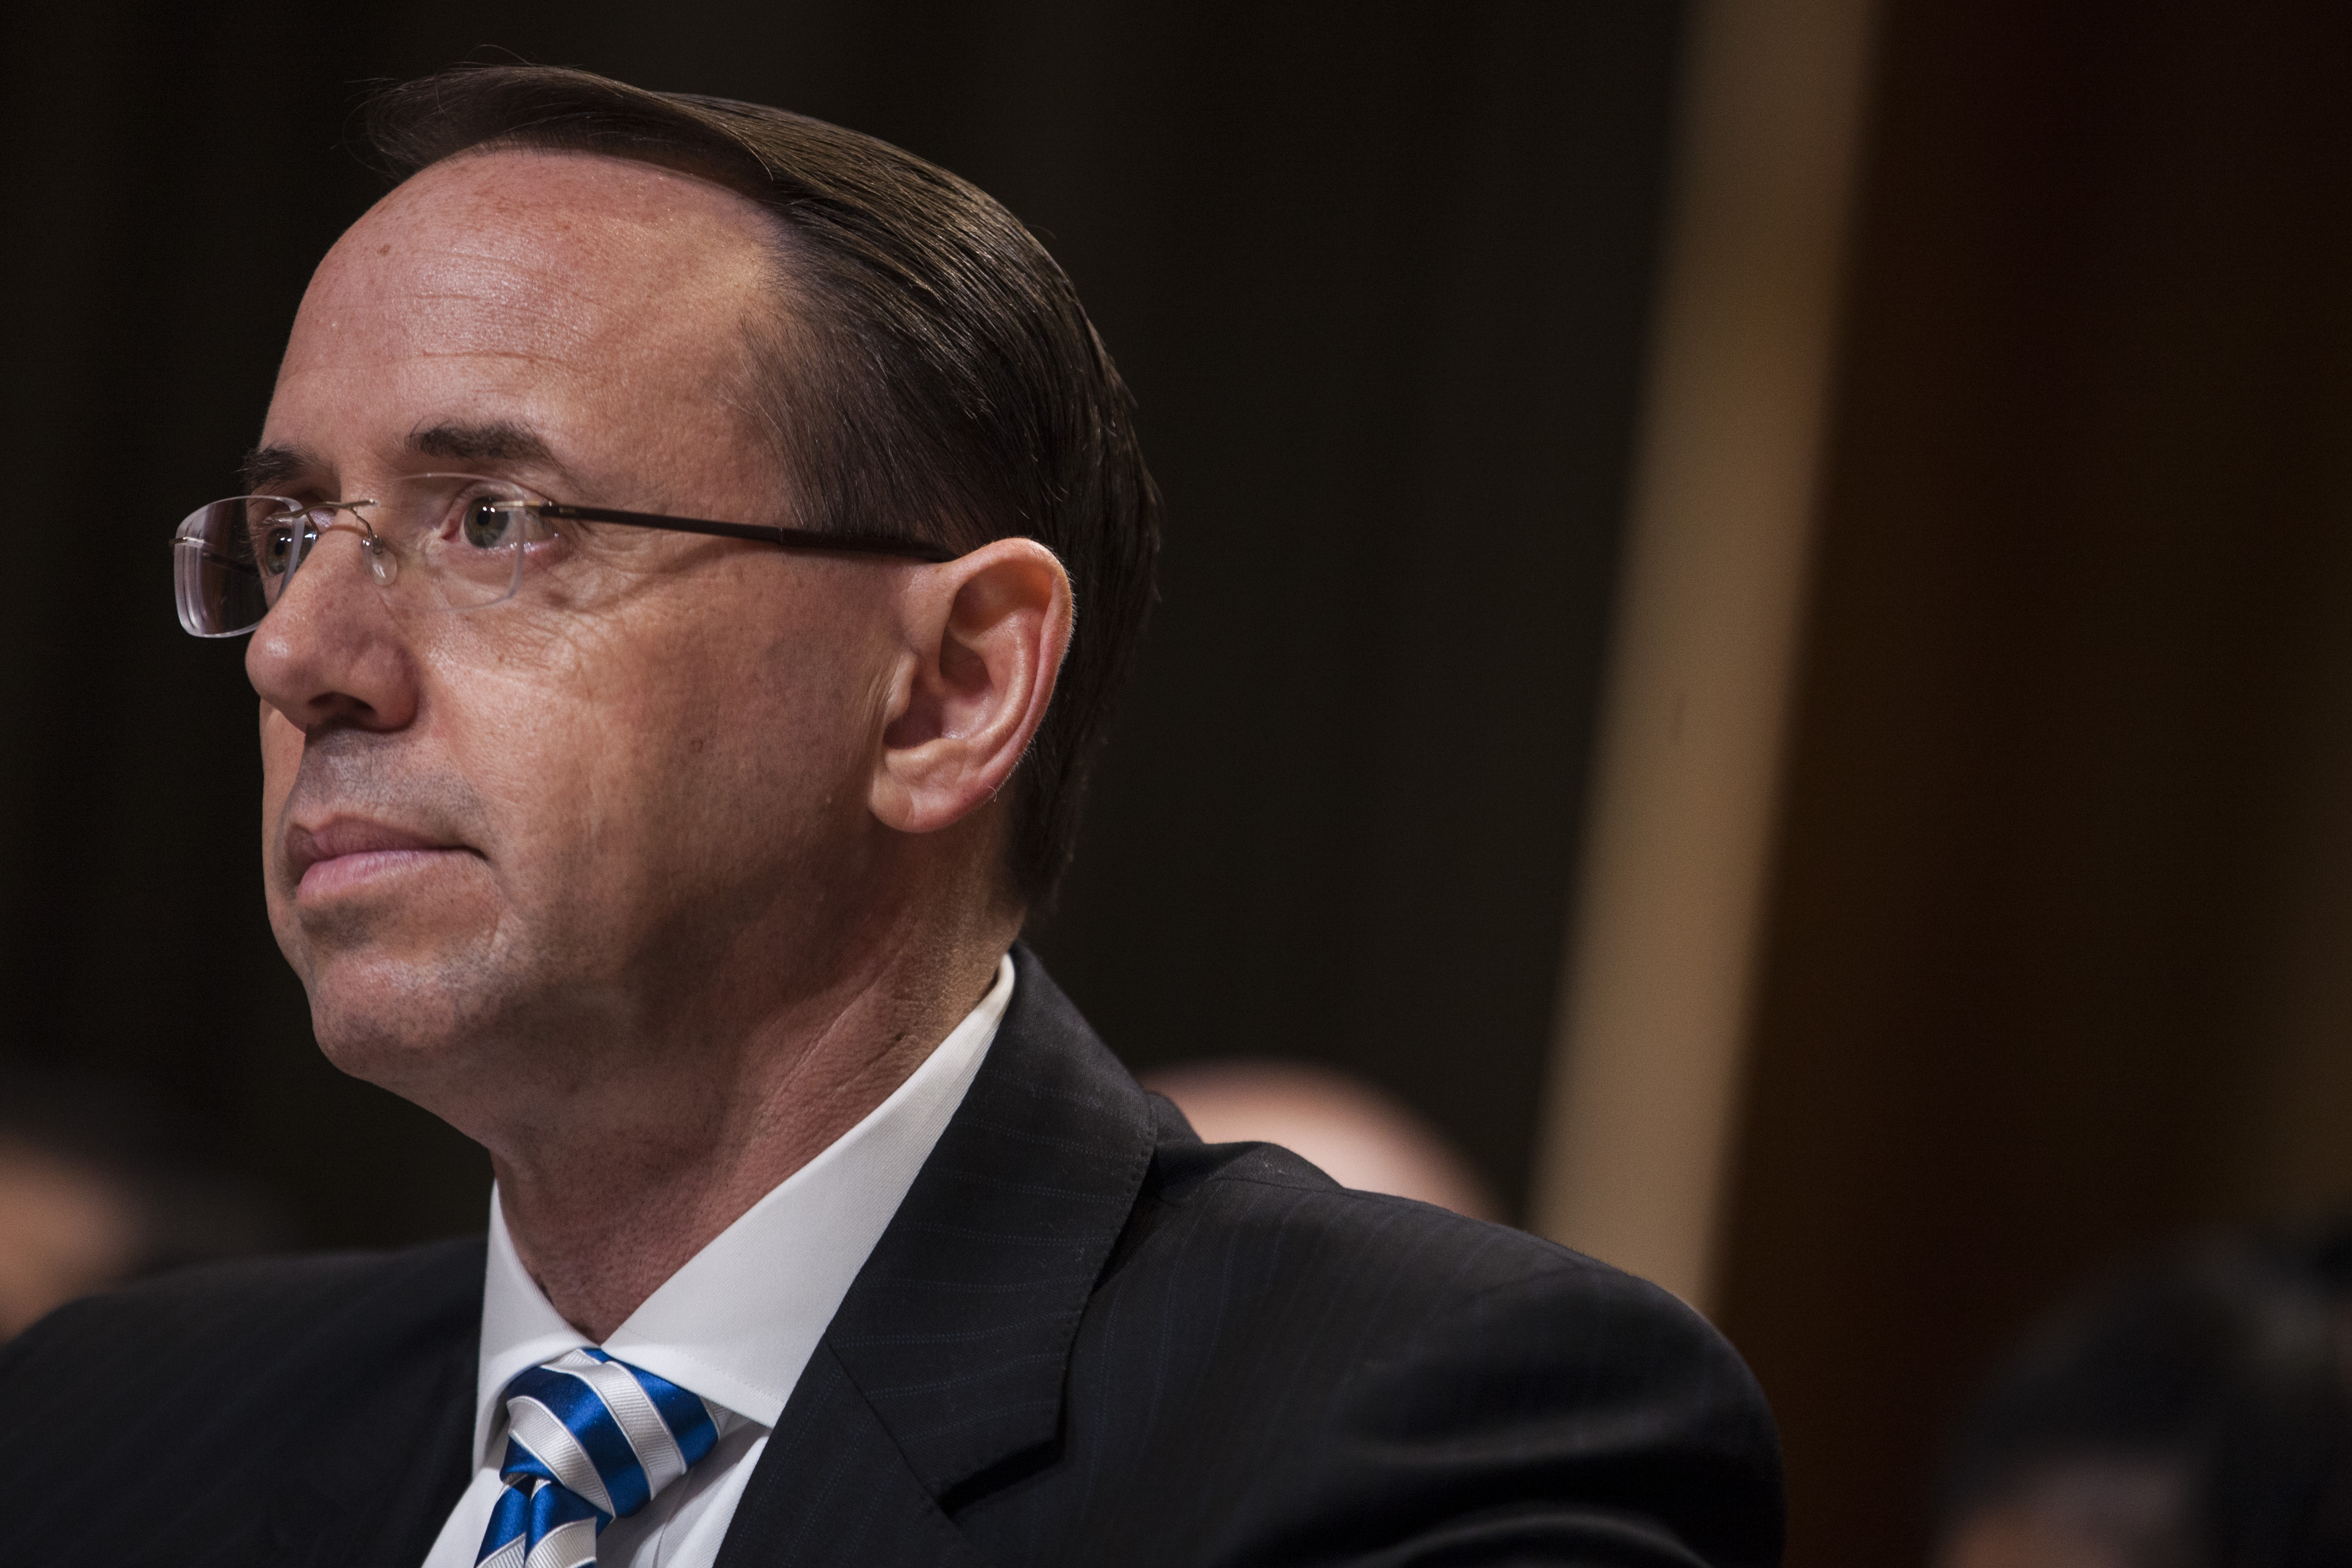 Deputy Attorney General Rod Rosenstein testifies during a Senate Commerce, Justice, Science, and Related Agencies Subcommittee hearing on the Justice Department's proposed FY18 budget  on Capitol Hill on June 13, 2017 in Washington, D.C. Zach Gibson&mdash;Getty Images (Zach Gibson&mdash;Getty Images)